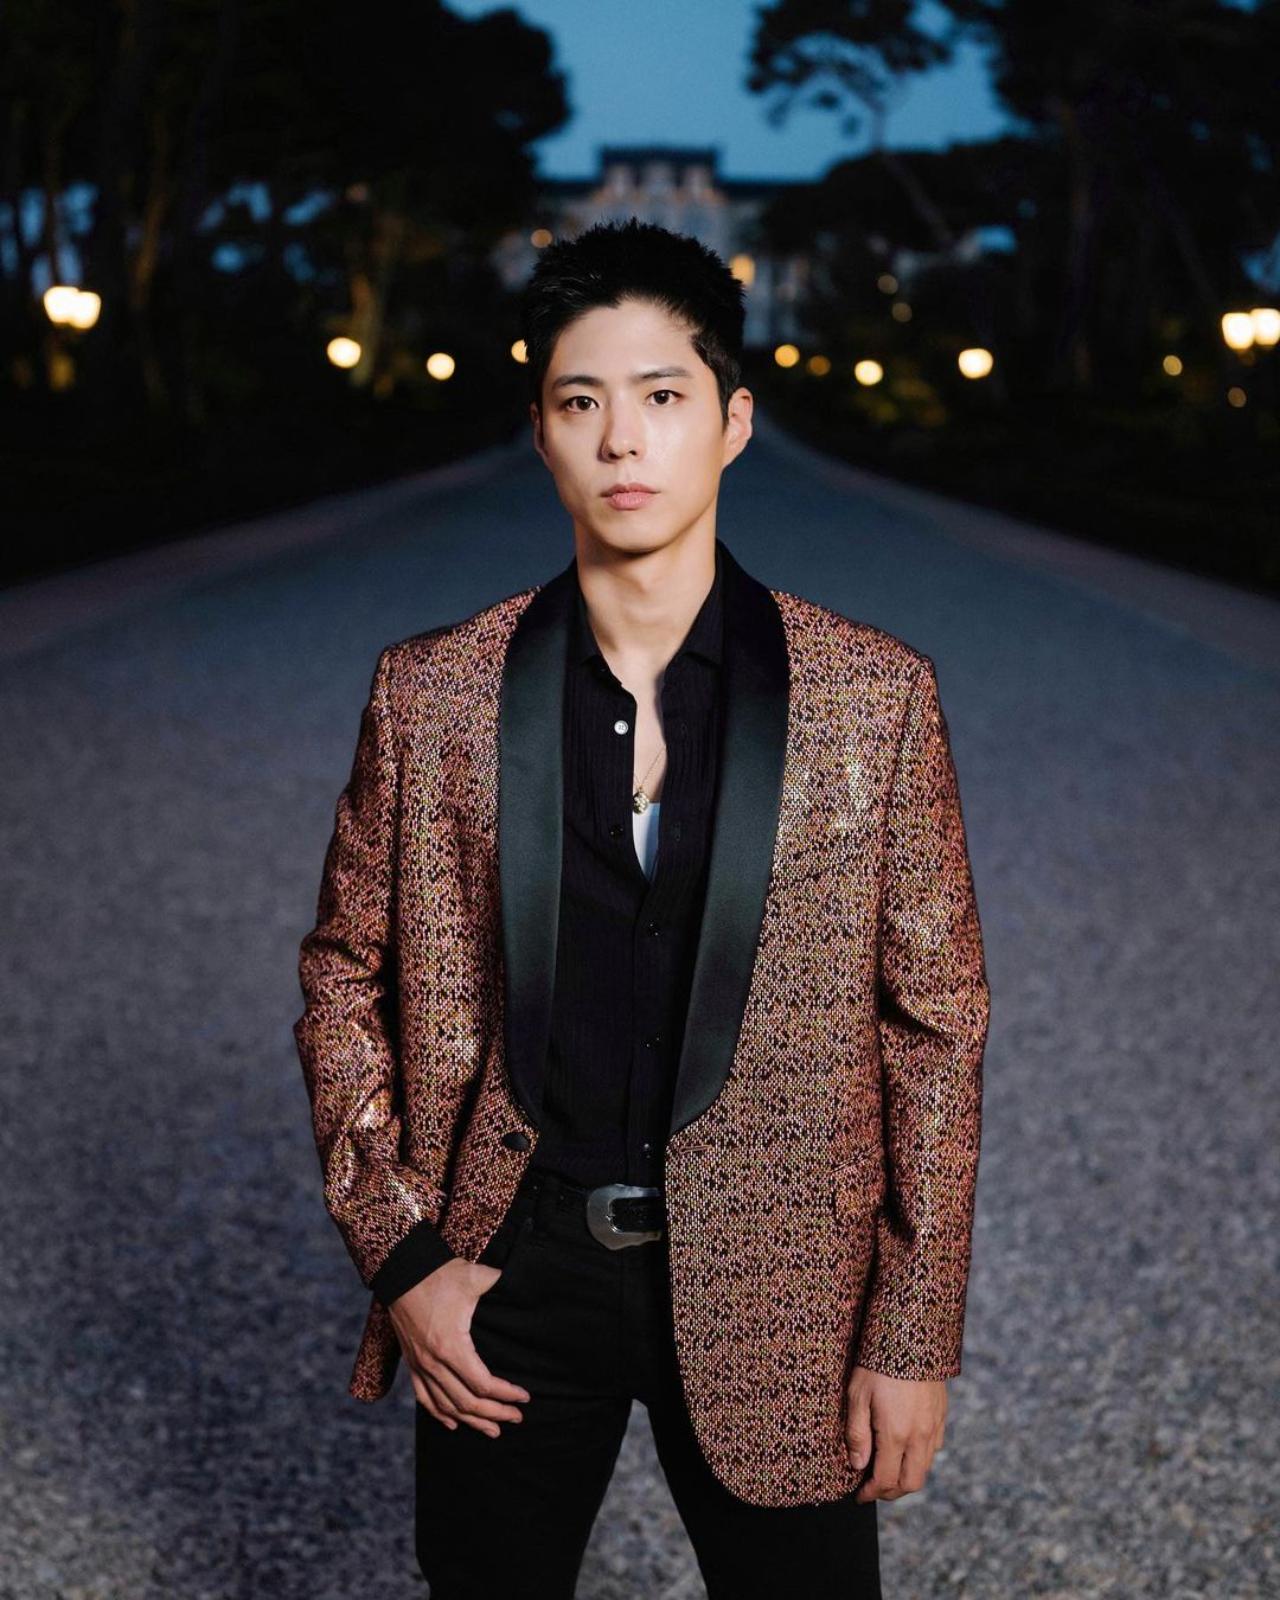 Park Bo Gum for CELINE
Park Bo Gum represents the French luxury brand 'Celine' as a global ambassador. He became the first male actor in the history of the label to join the brand's global ambassador family